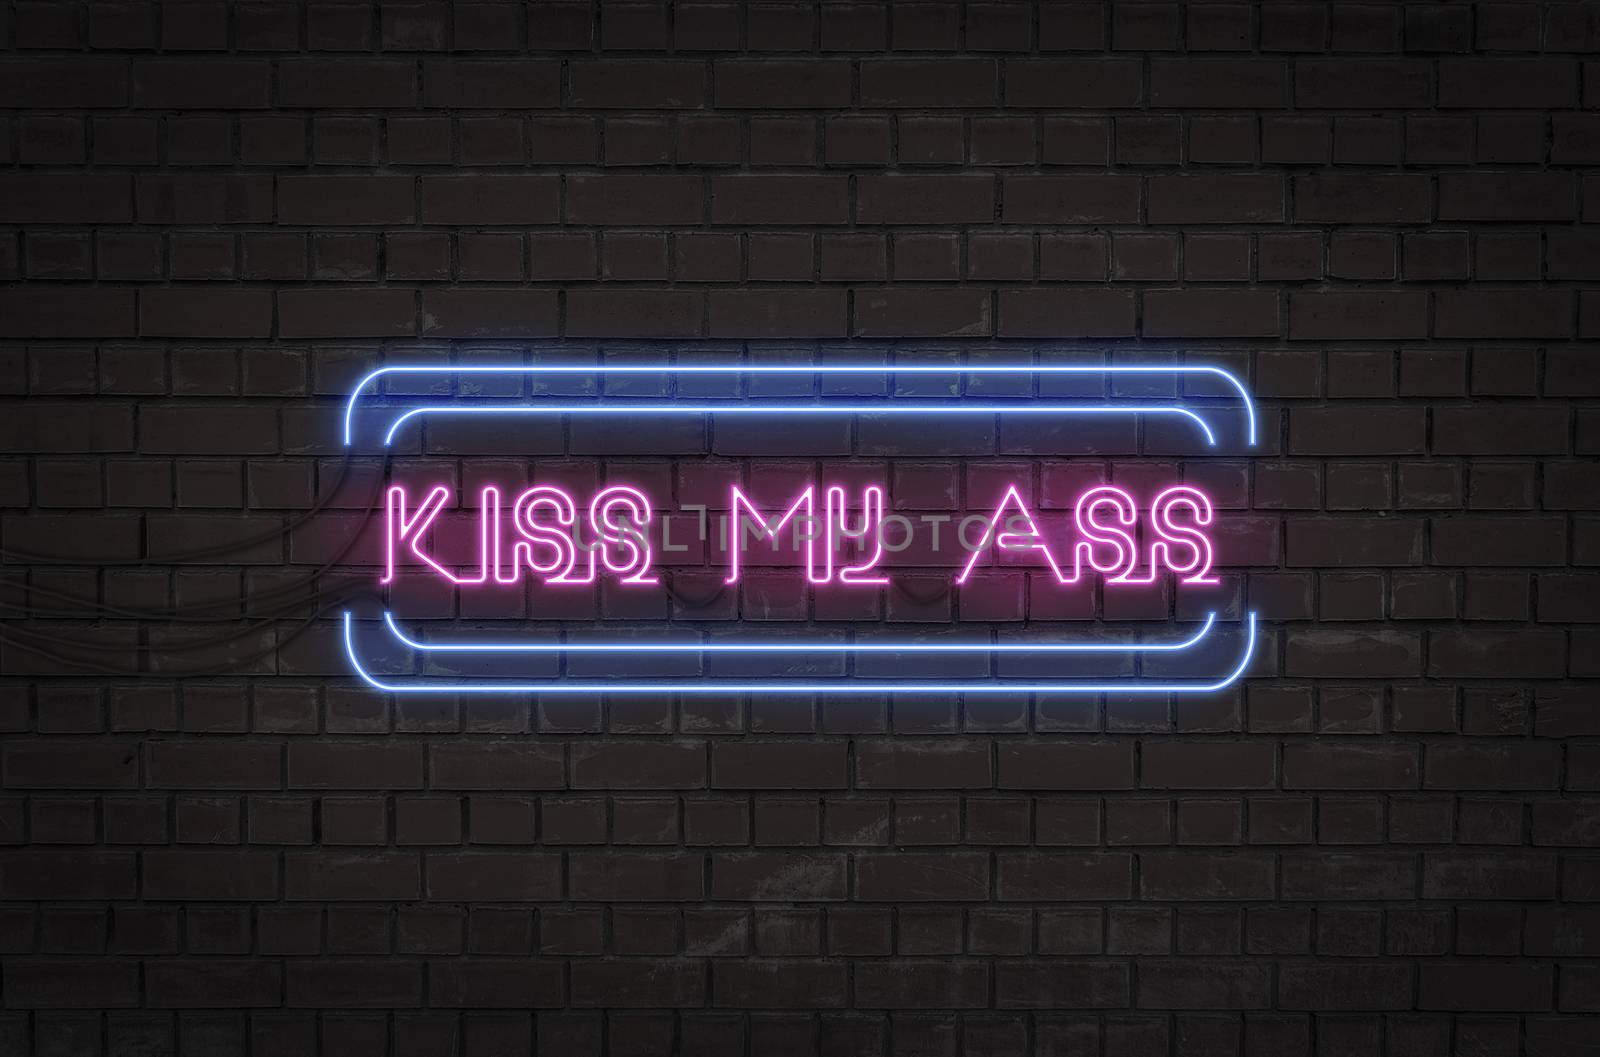 Illustration of a neon sign on a brick wall with the text "Kiss my ass"